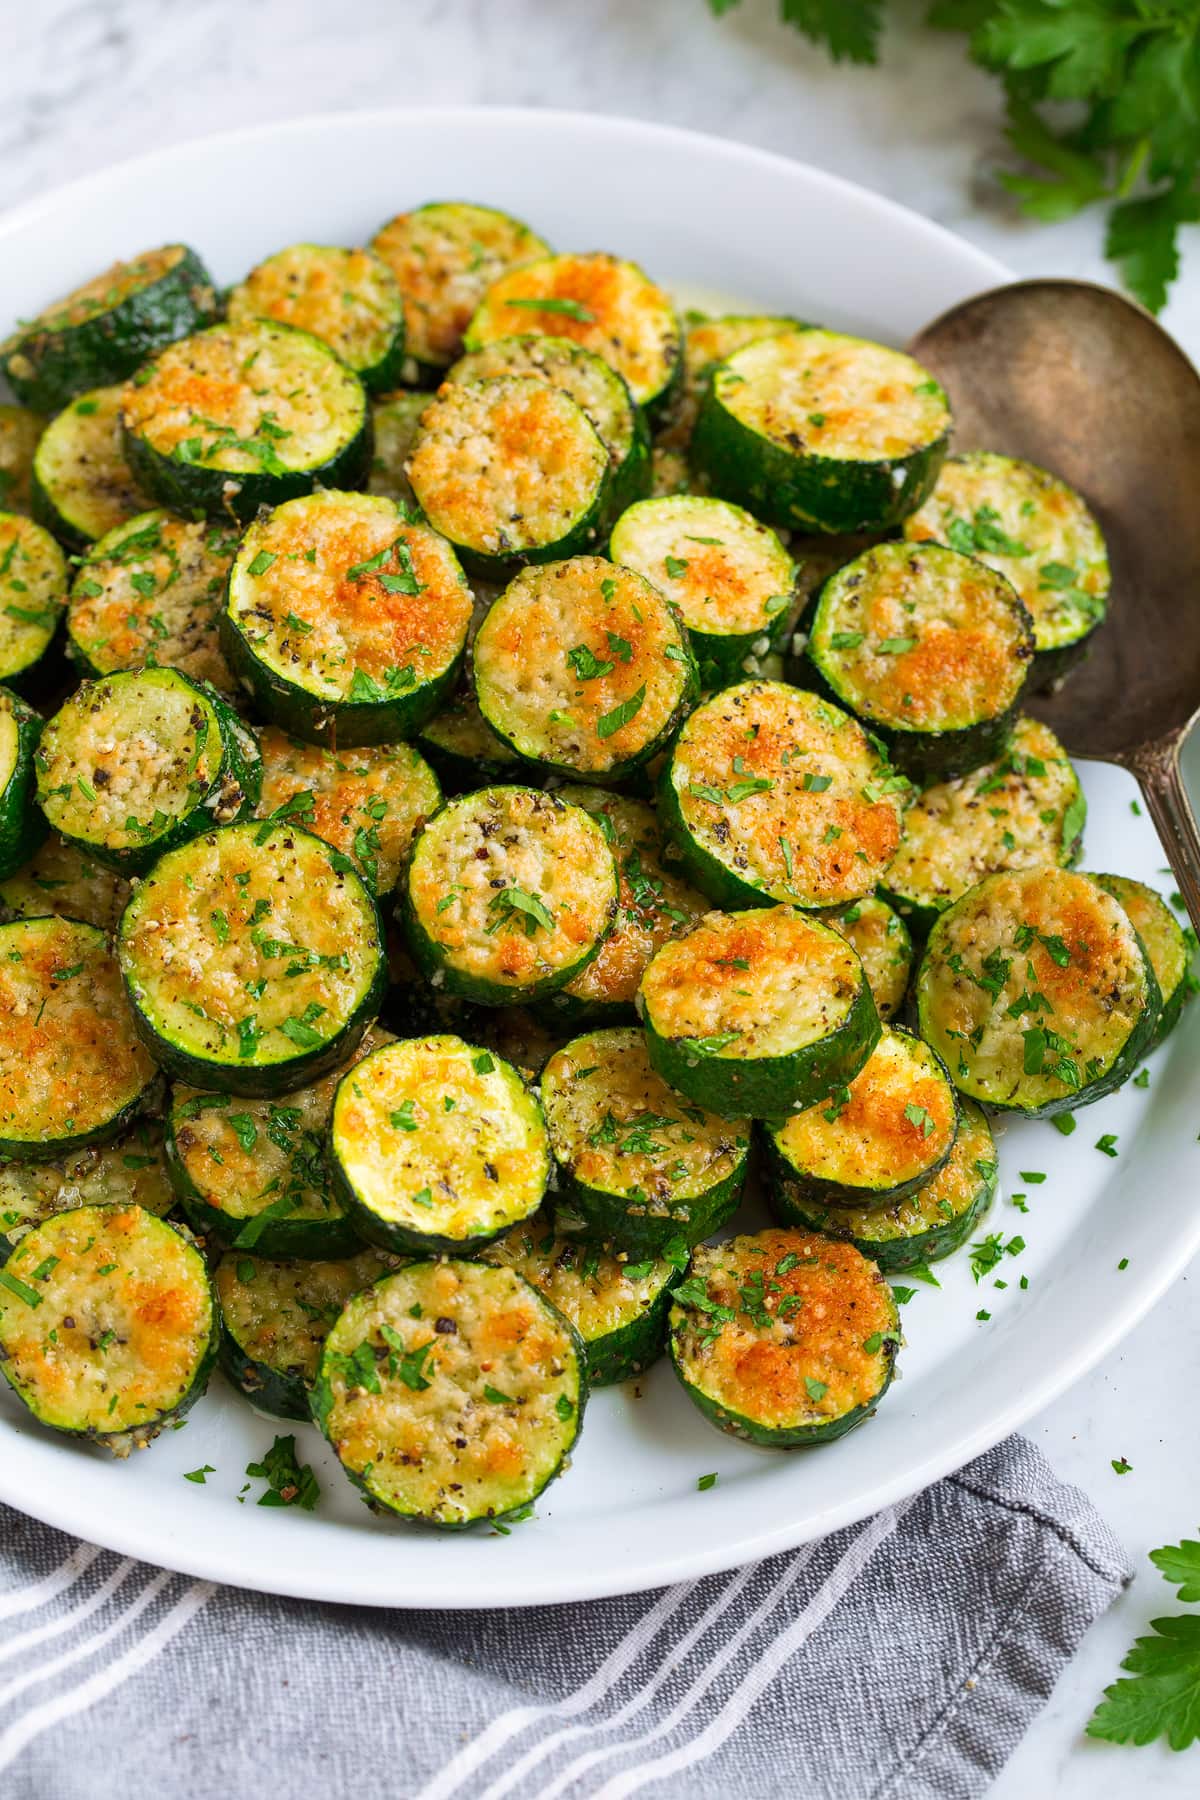 Baked Zucchini – Cooking Classy